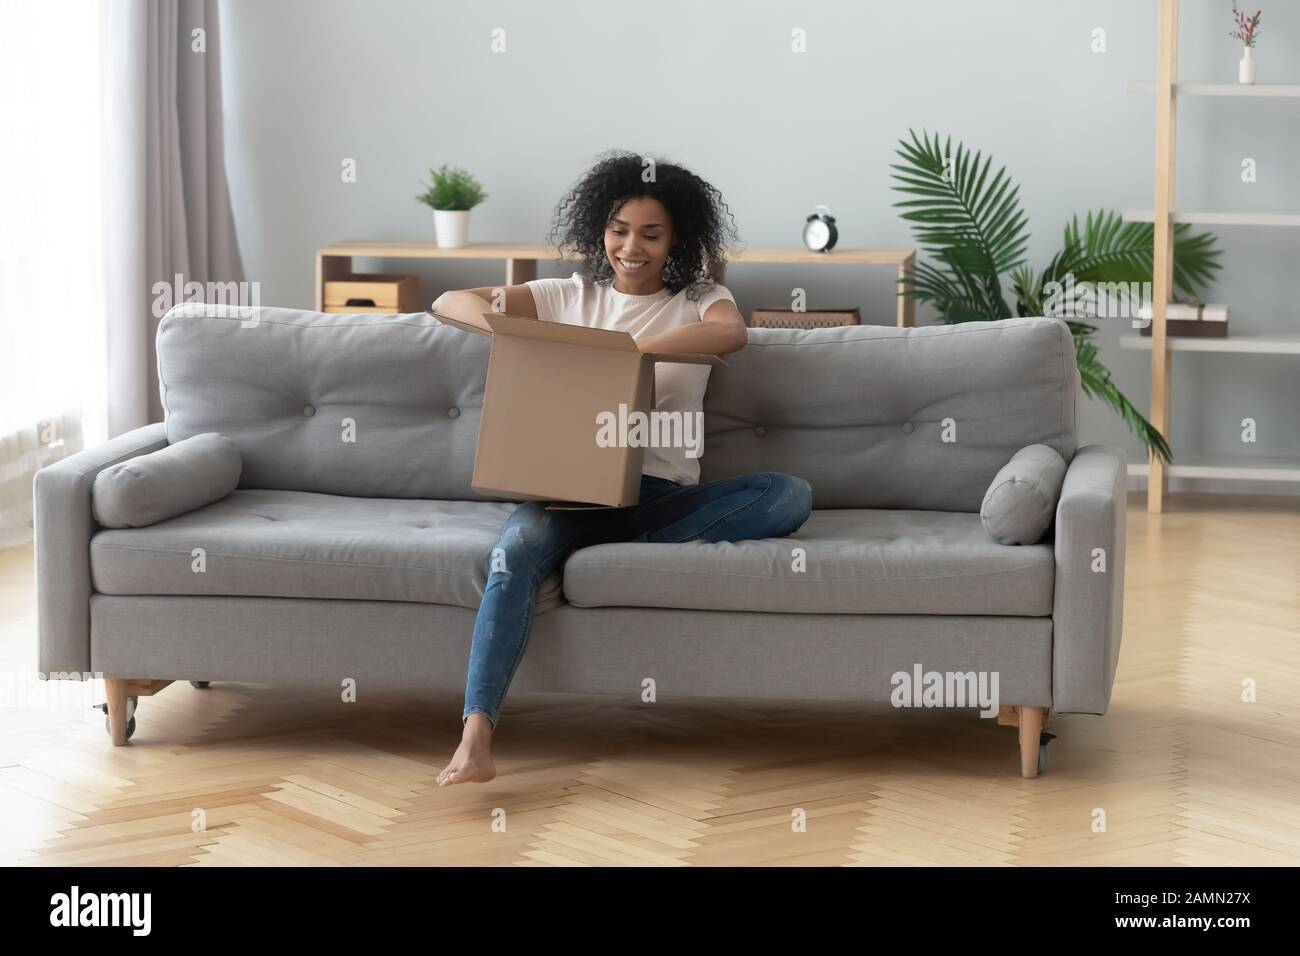 African woman sitting on couch unpacking received parcel feels happy Stock Photo